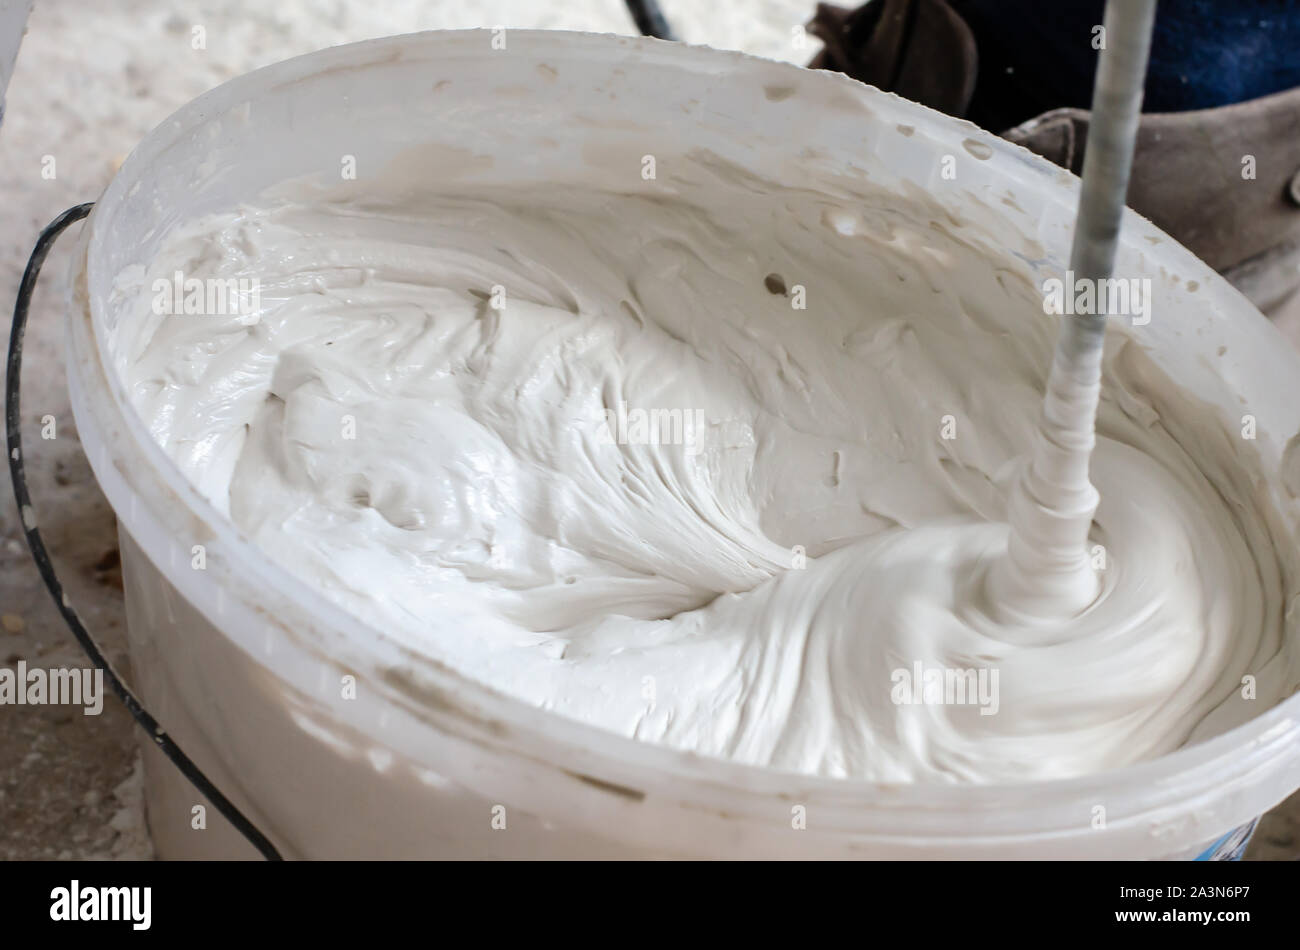 Mixing putty solution in a pail. Construction works concept Stock Photo